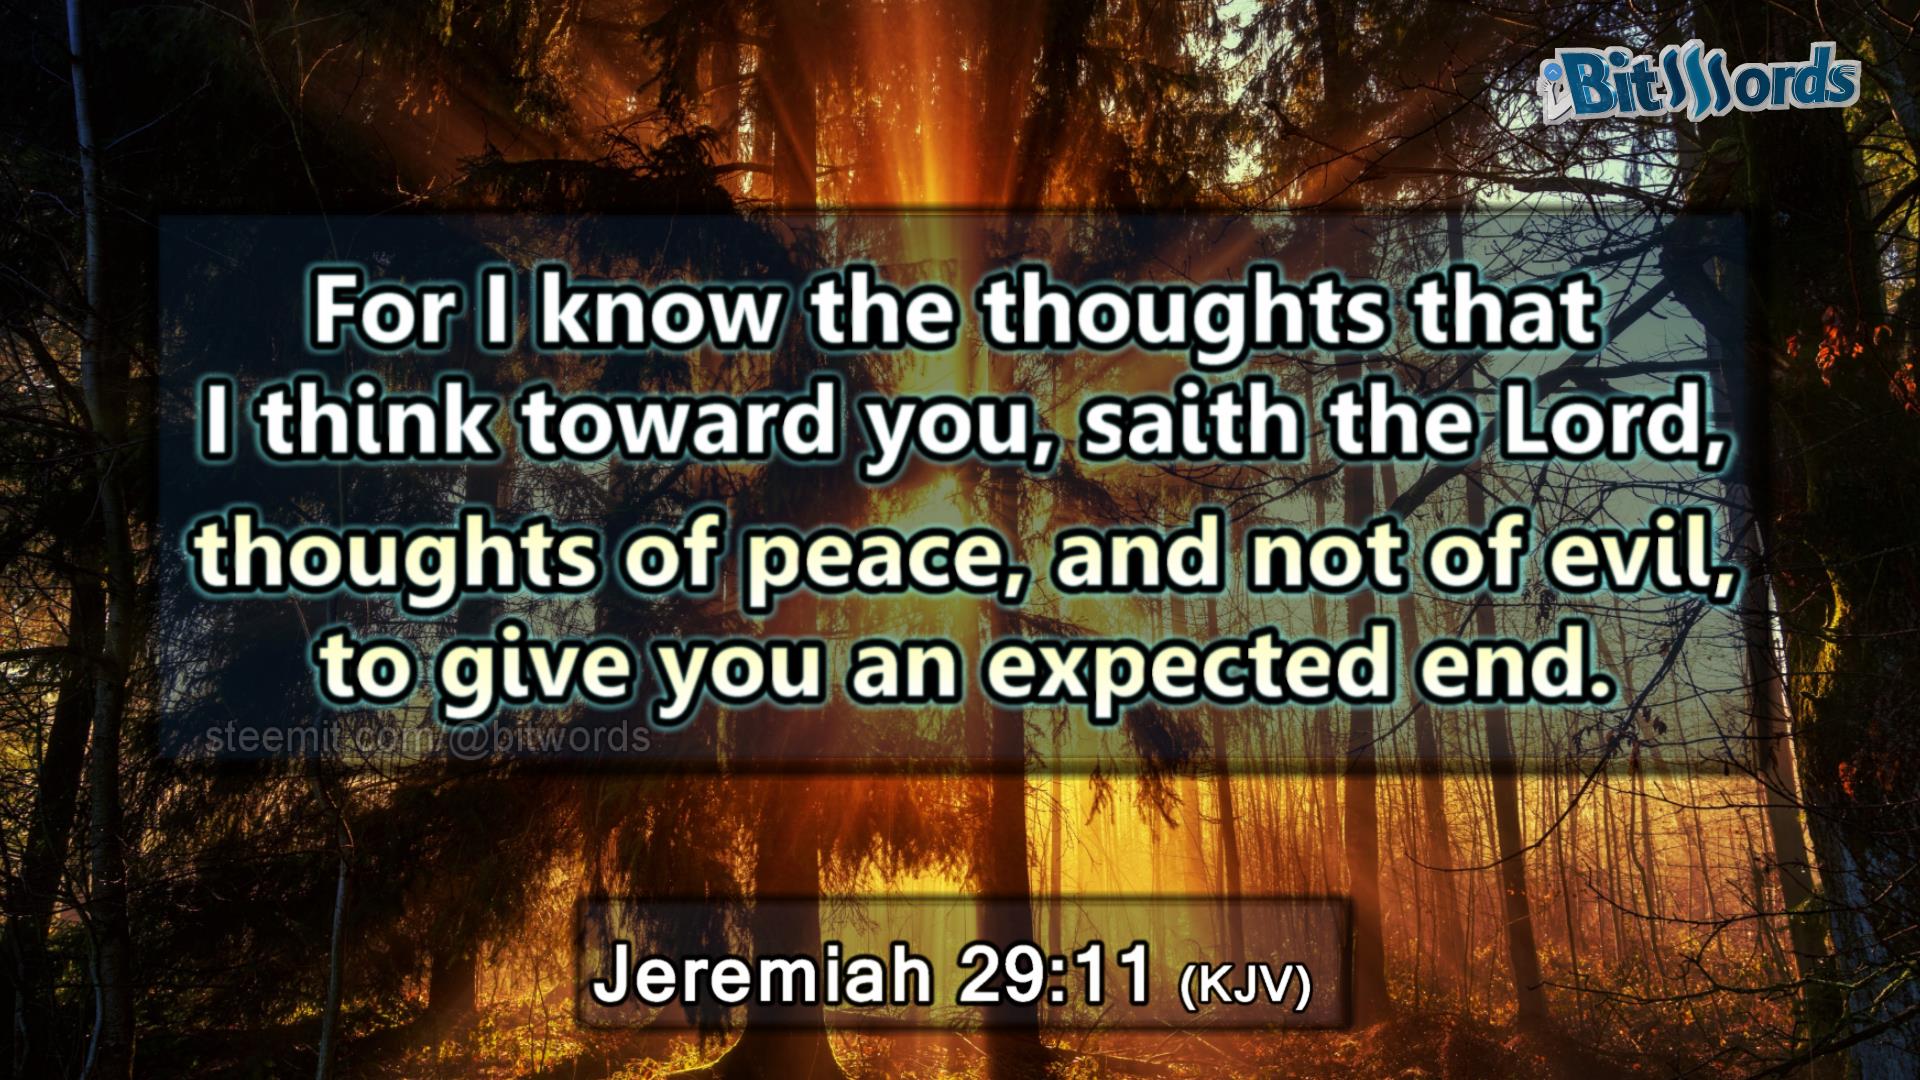 bitwords steemit bible verse of the day For I know the thoughts that I think toward you saith the Lord thoughts of peace and not of evil to give you an expected end Jeremiah 29 11.jpg